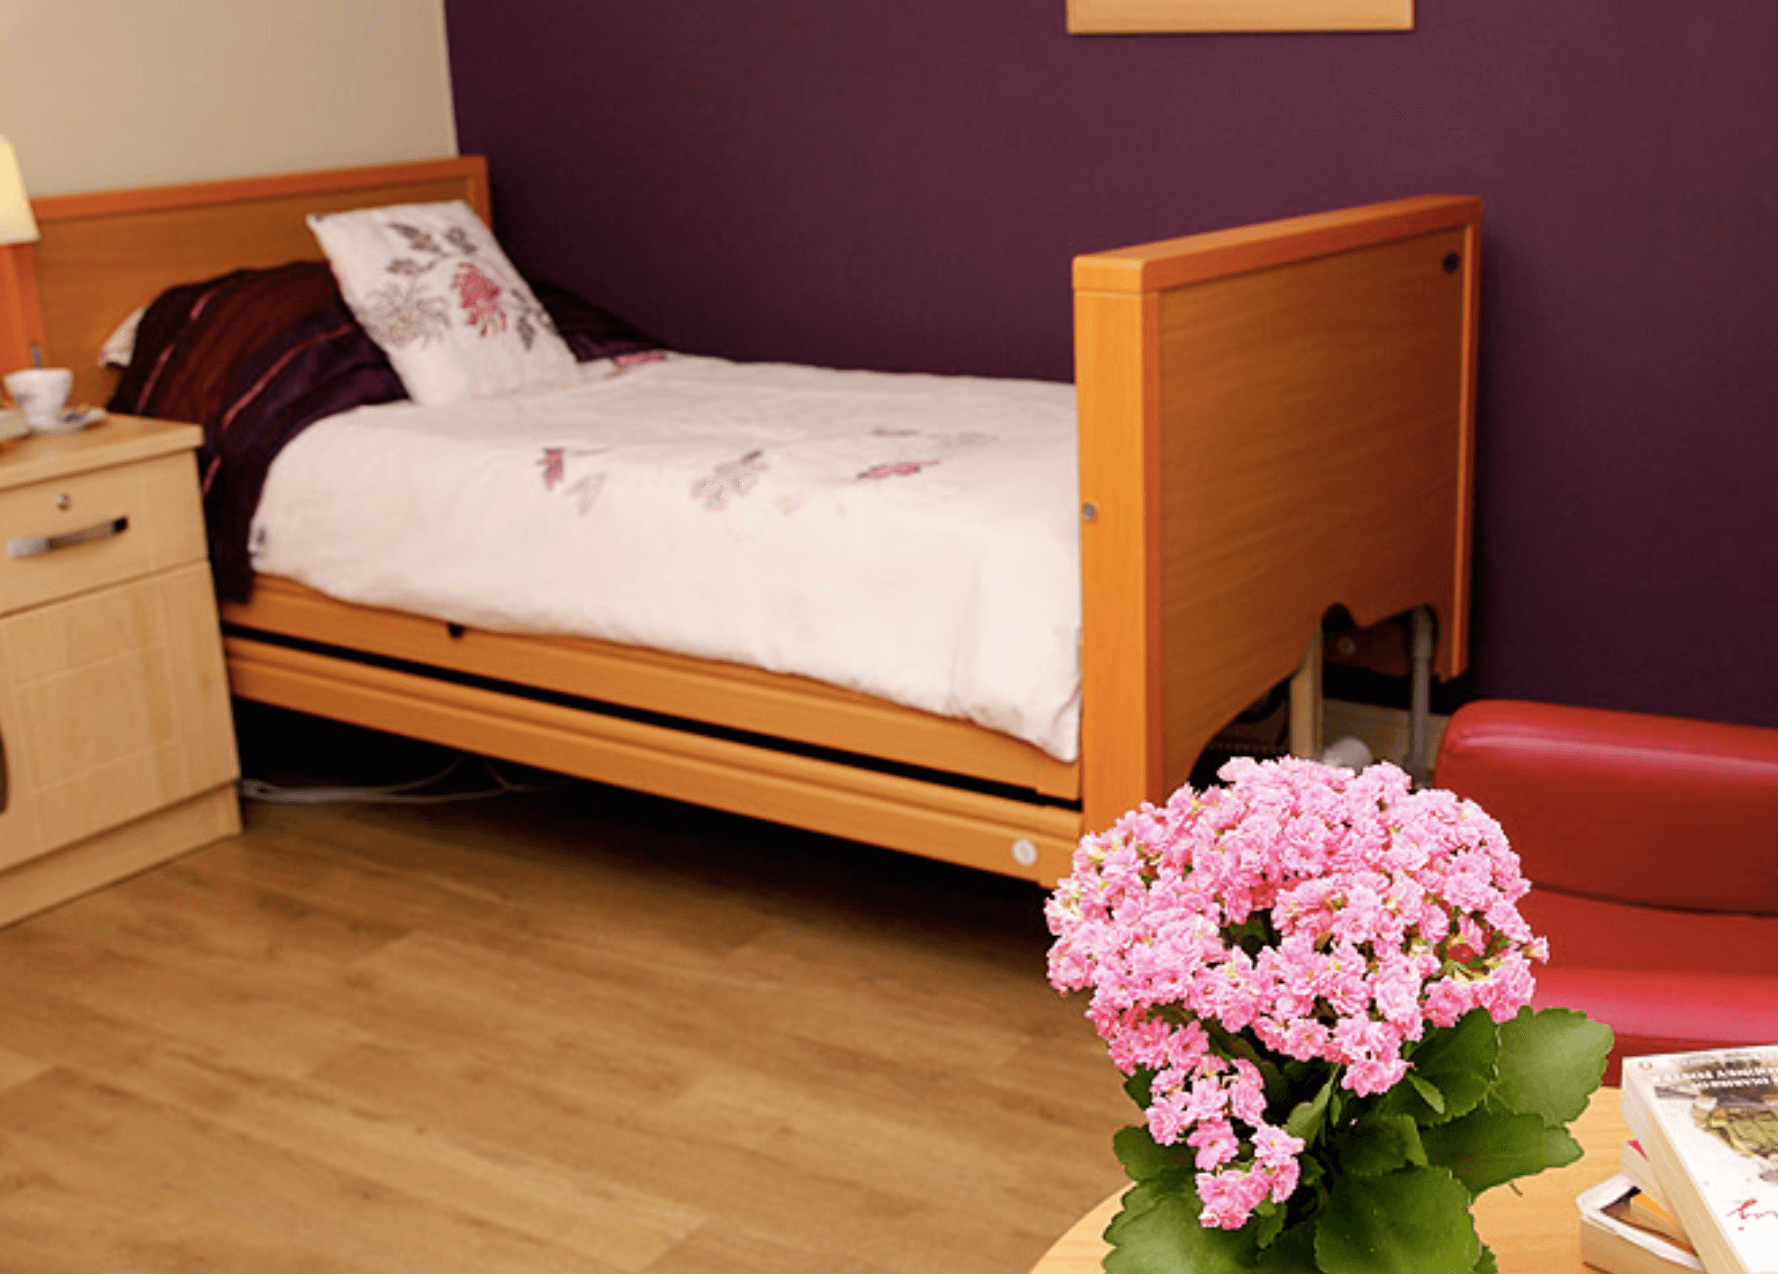 Bedroom of Hill View Care Home in Clydebank,Scotland